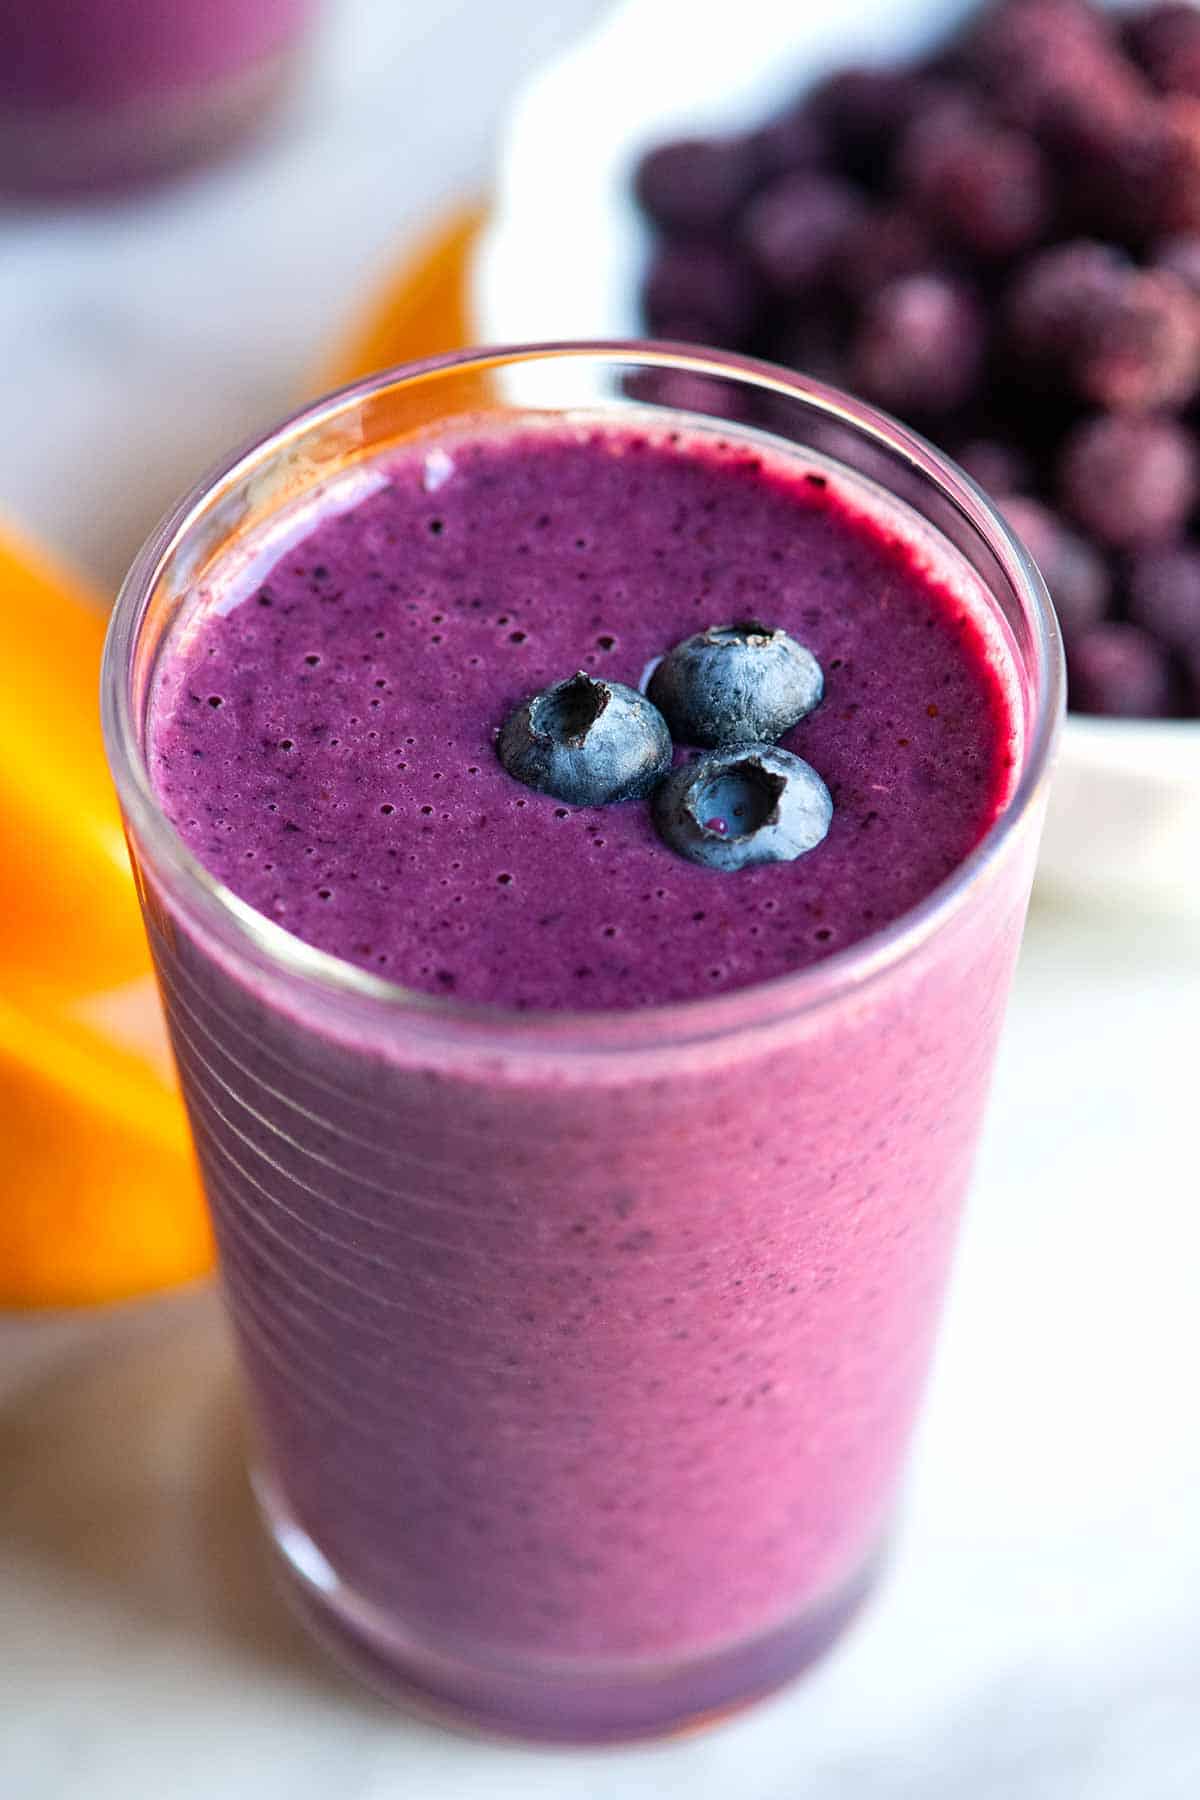 what to mix with blueberry smoothie